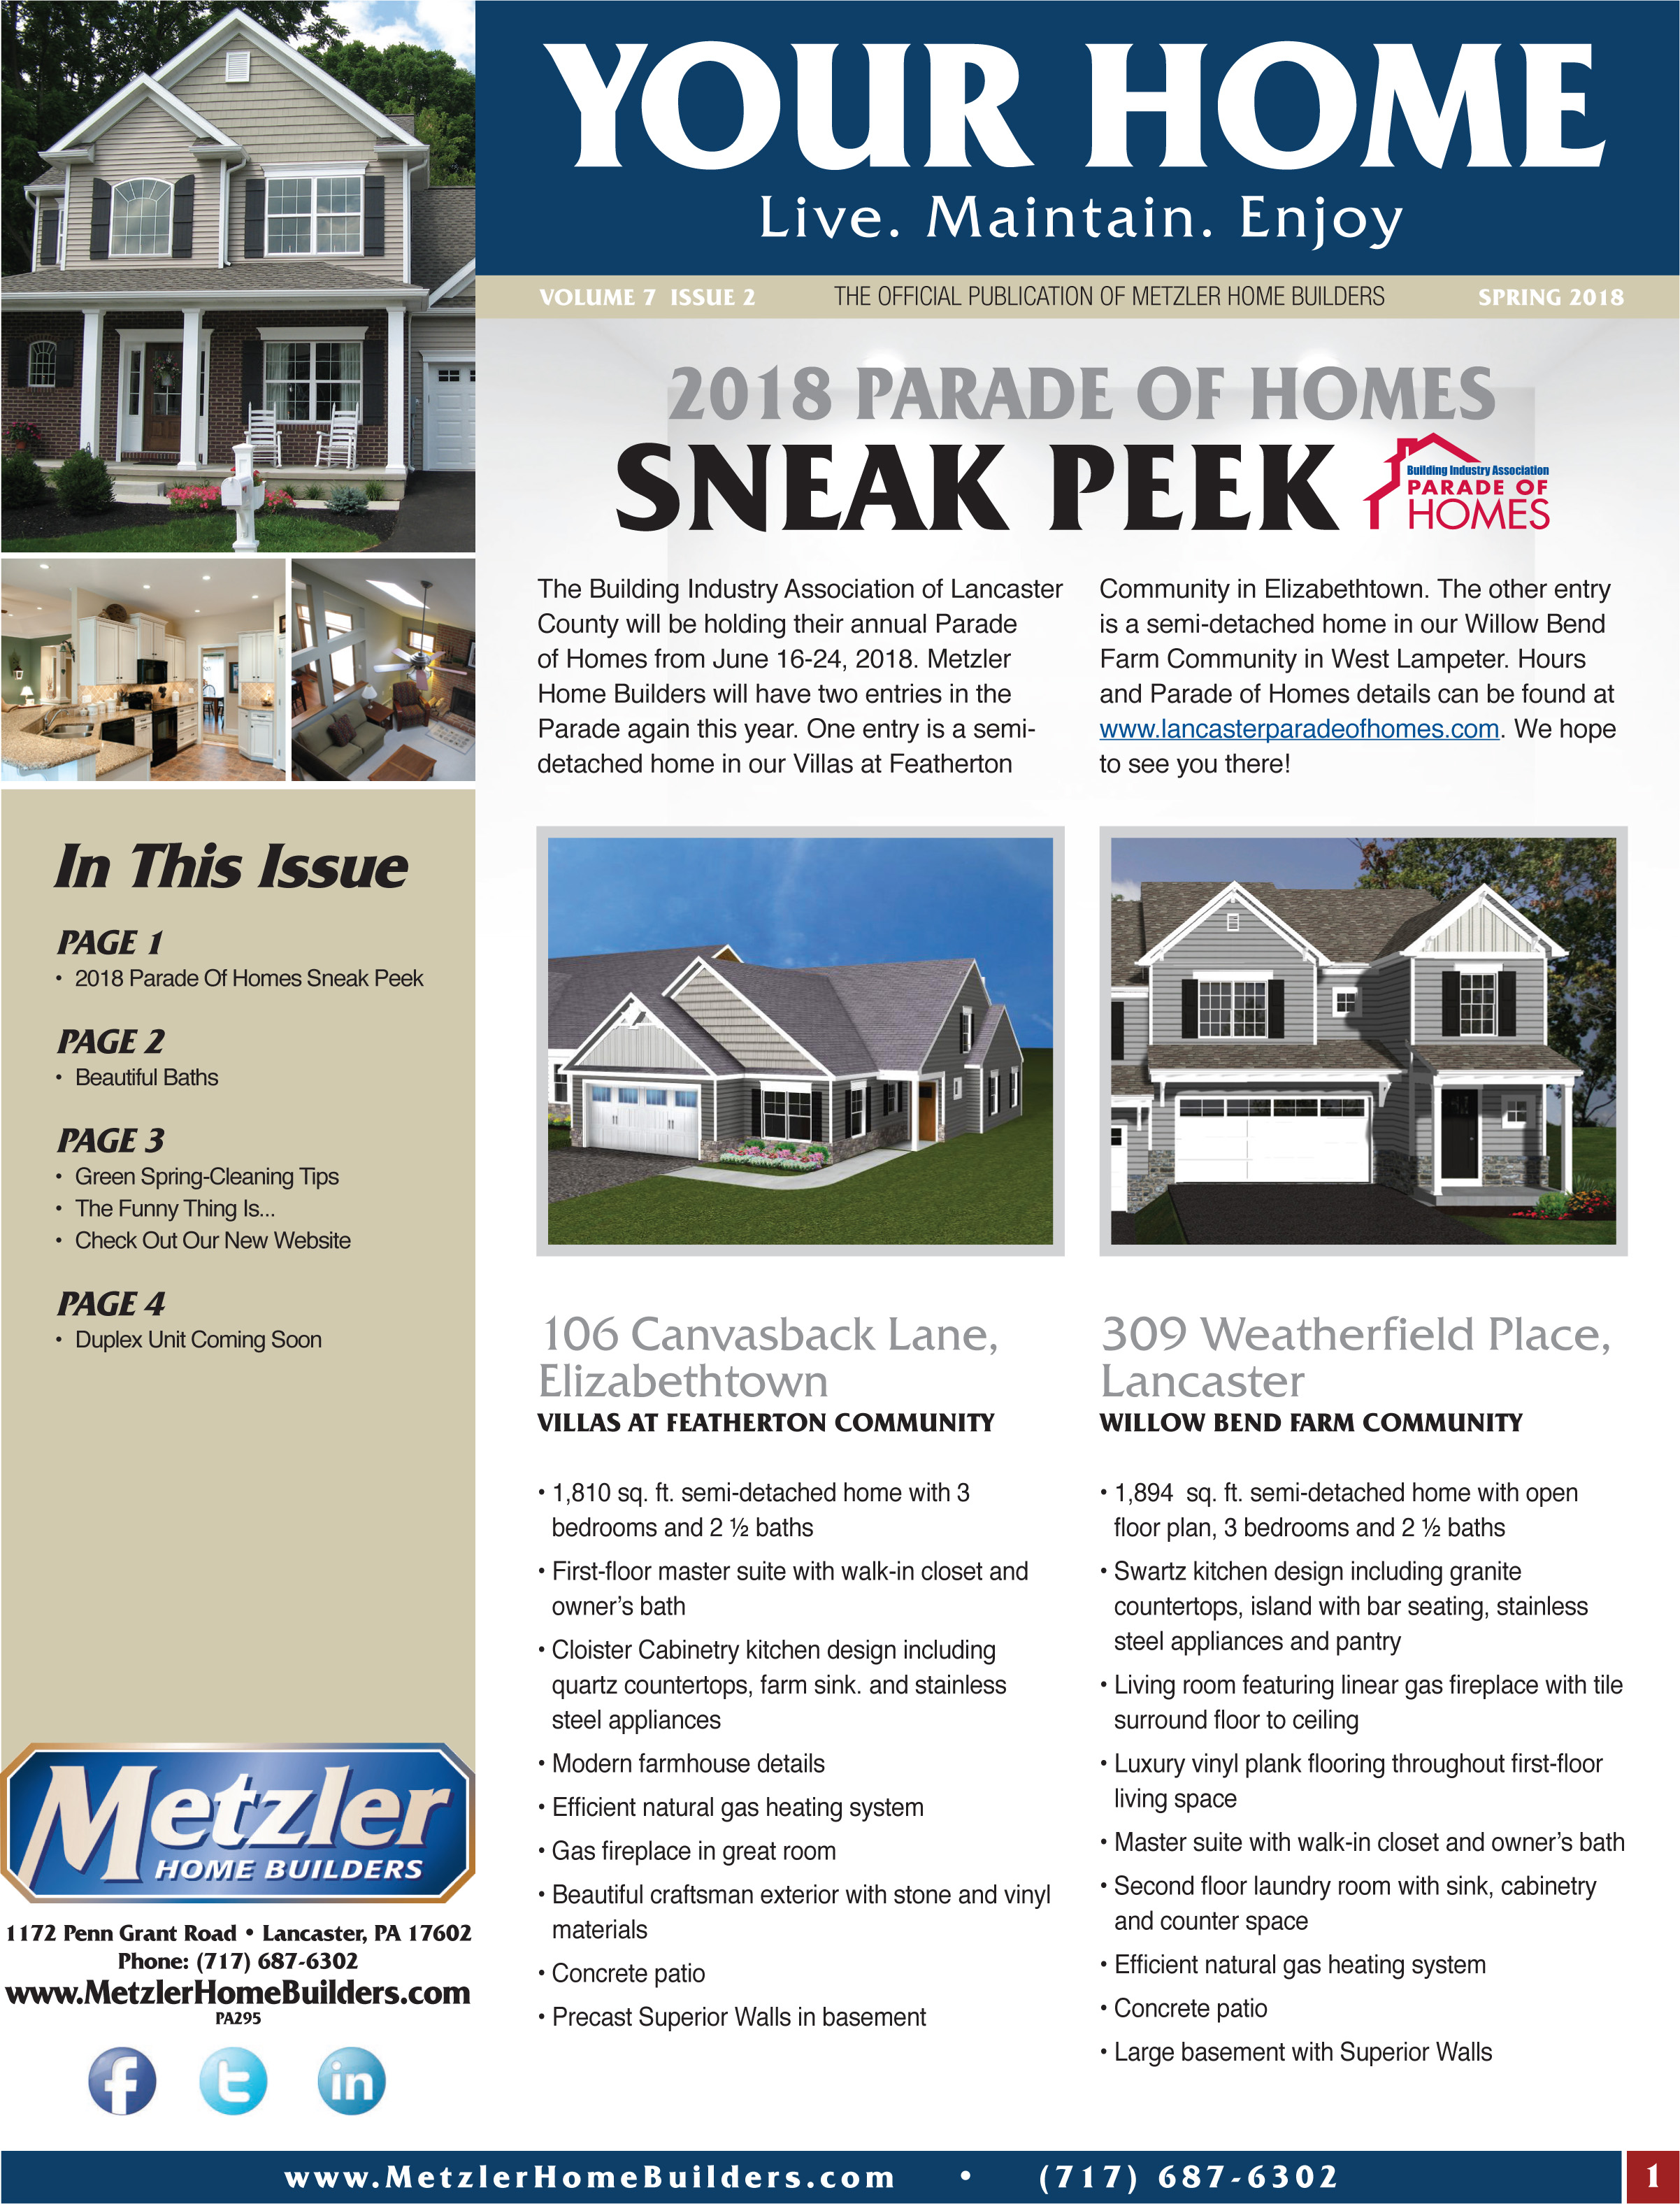 Metzler 'Your Home' Newsletter PDF cover for Volume 7 Issue 2